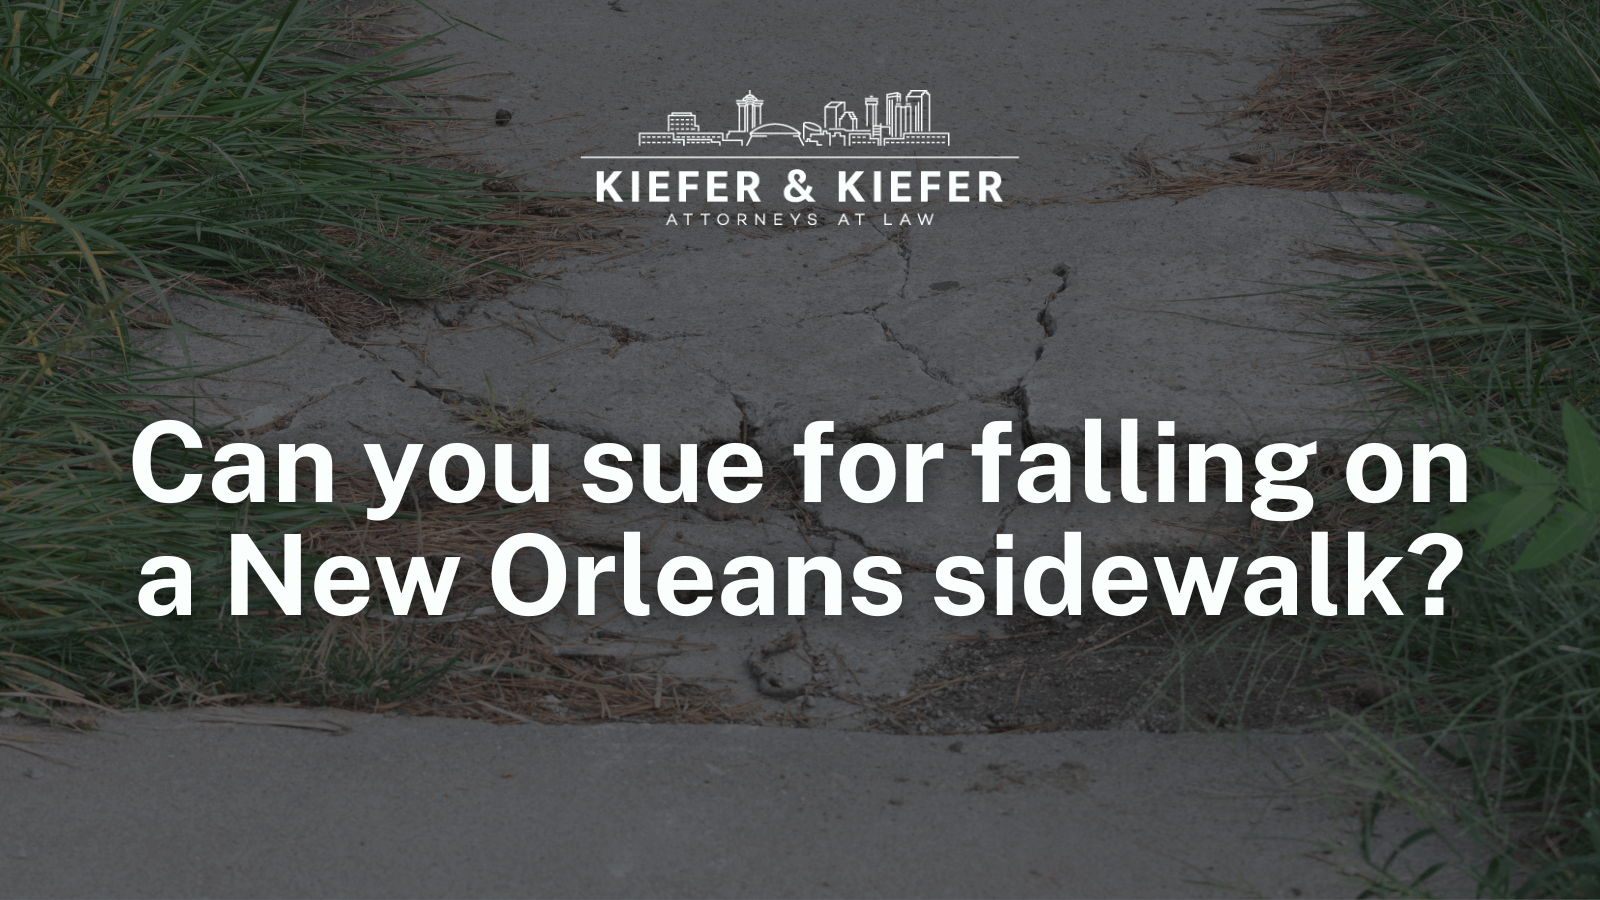 Can you sue for falling on a New Orleans sidewalk - Kiefer & Kiefer New Orleans Personal Injury Attorneys